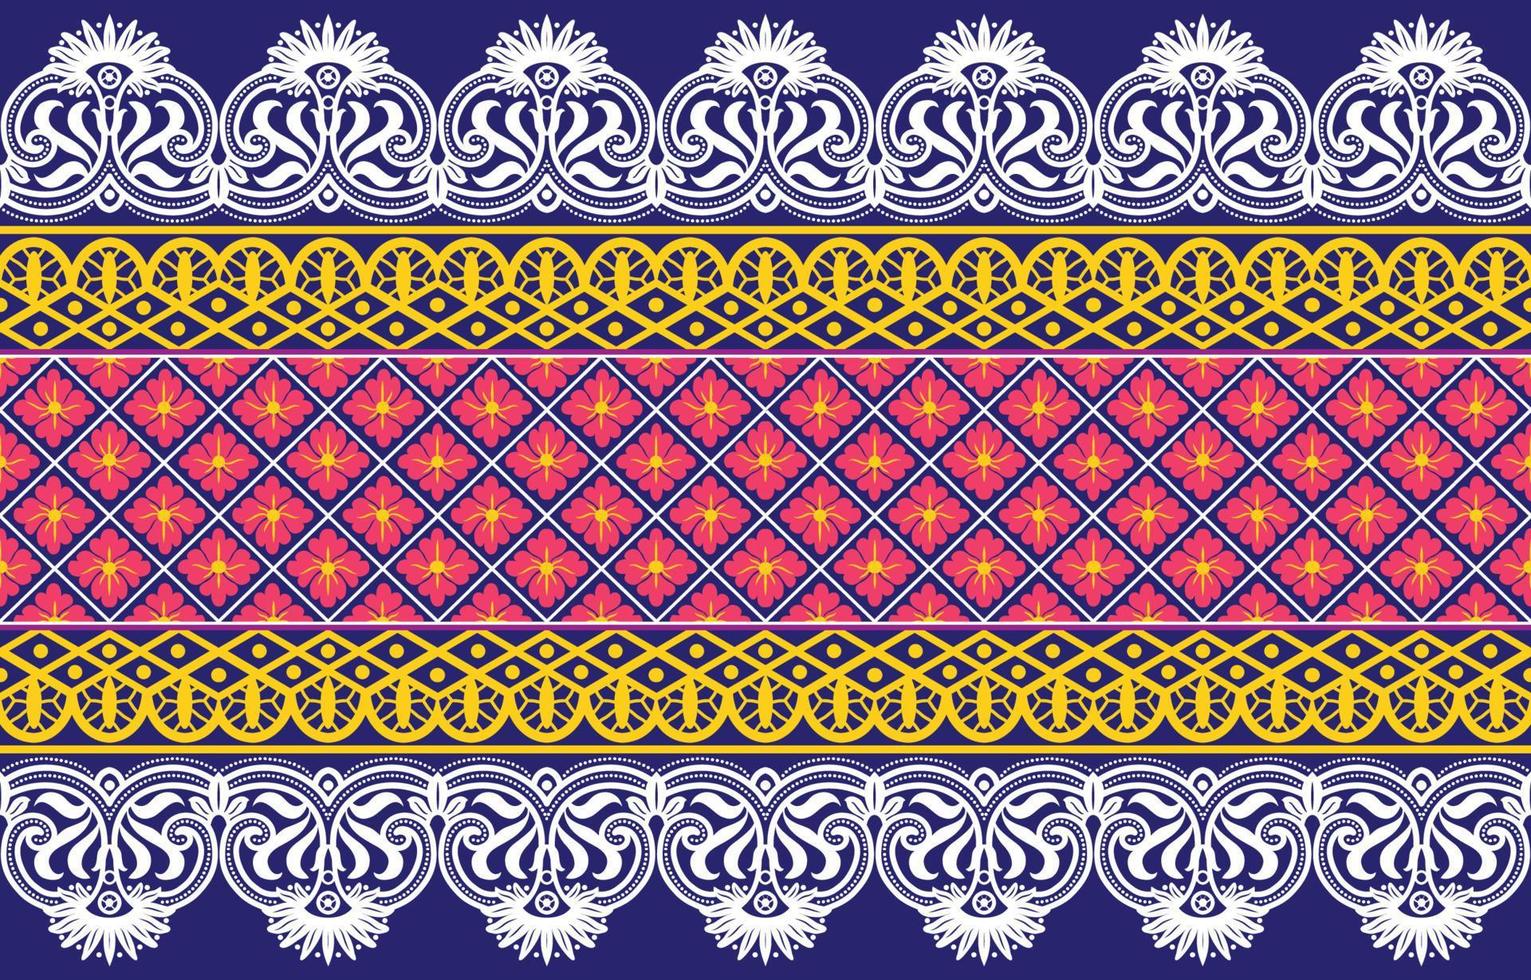 Geometric ethnic pattern seamless design for background or wallpaper. vector